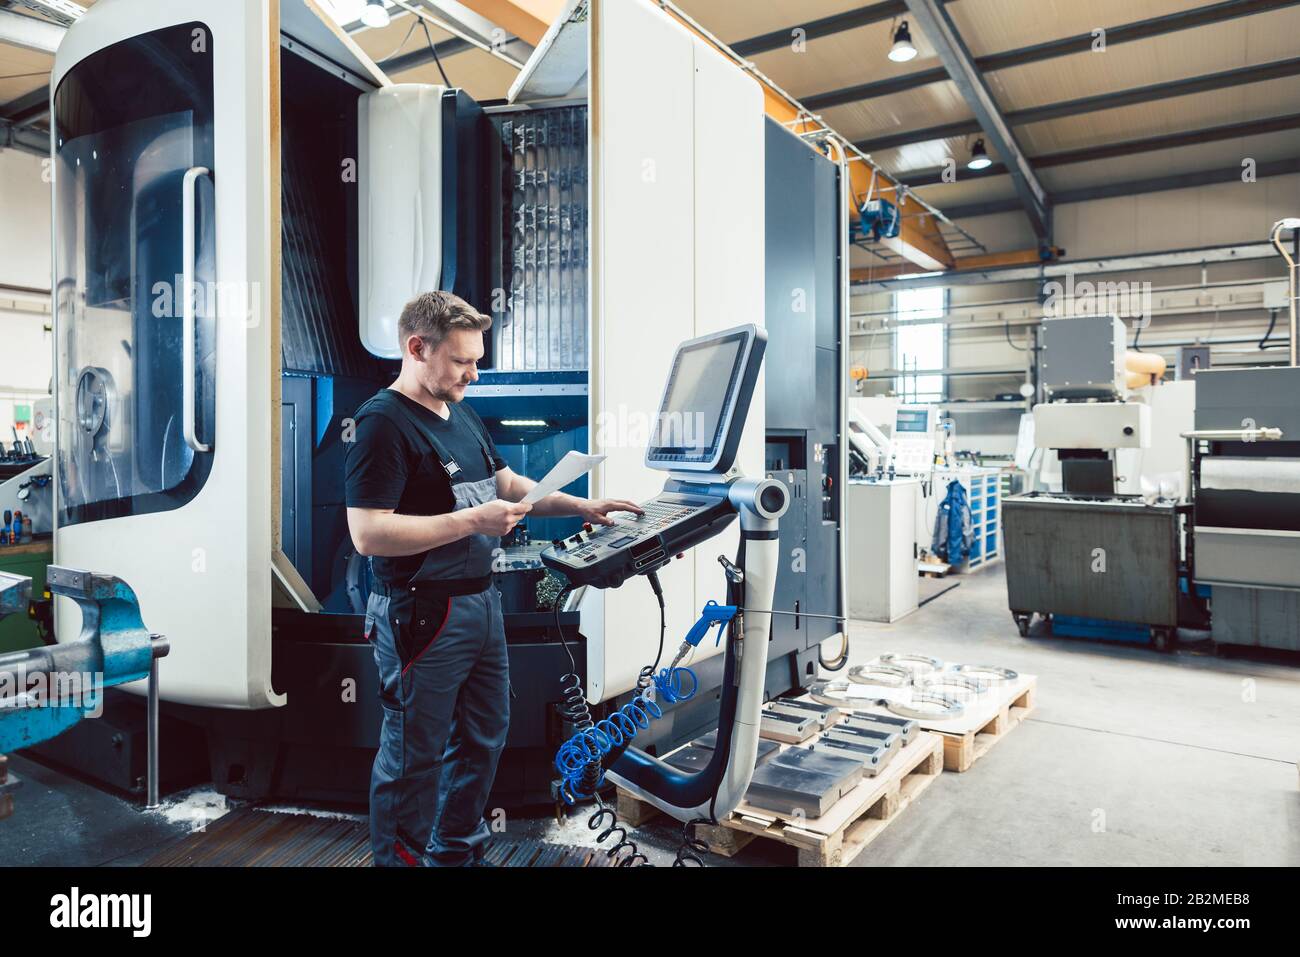 Worker in metal industry operating a modern cnc lathe Stock Photo